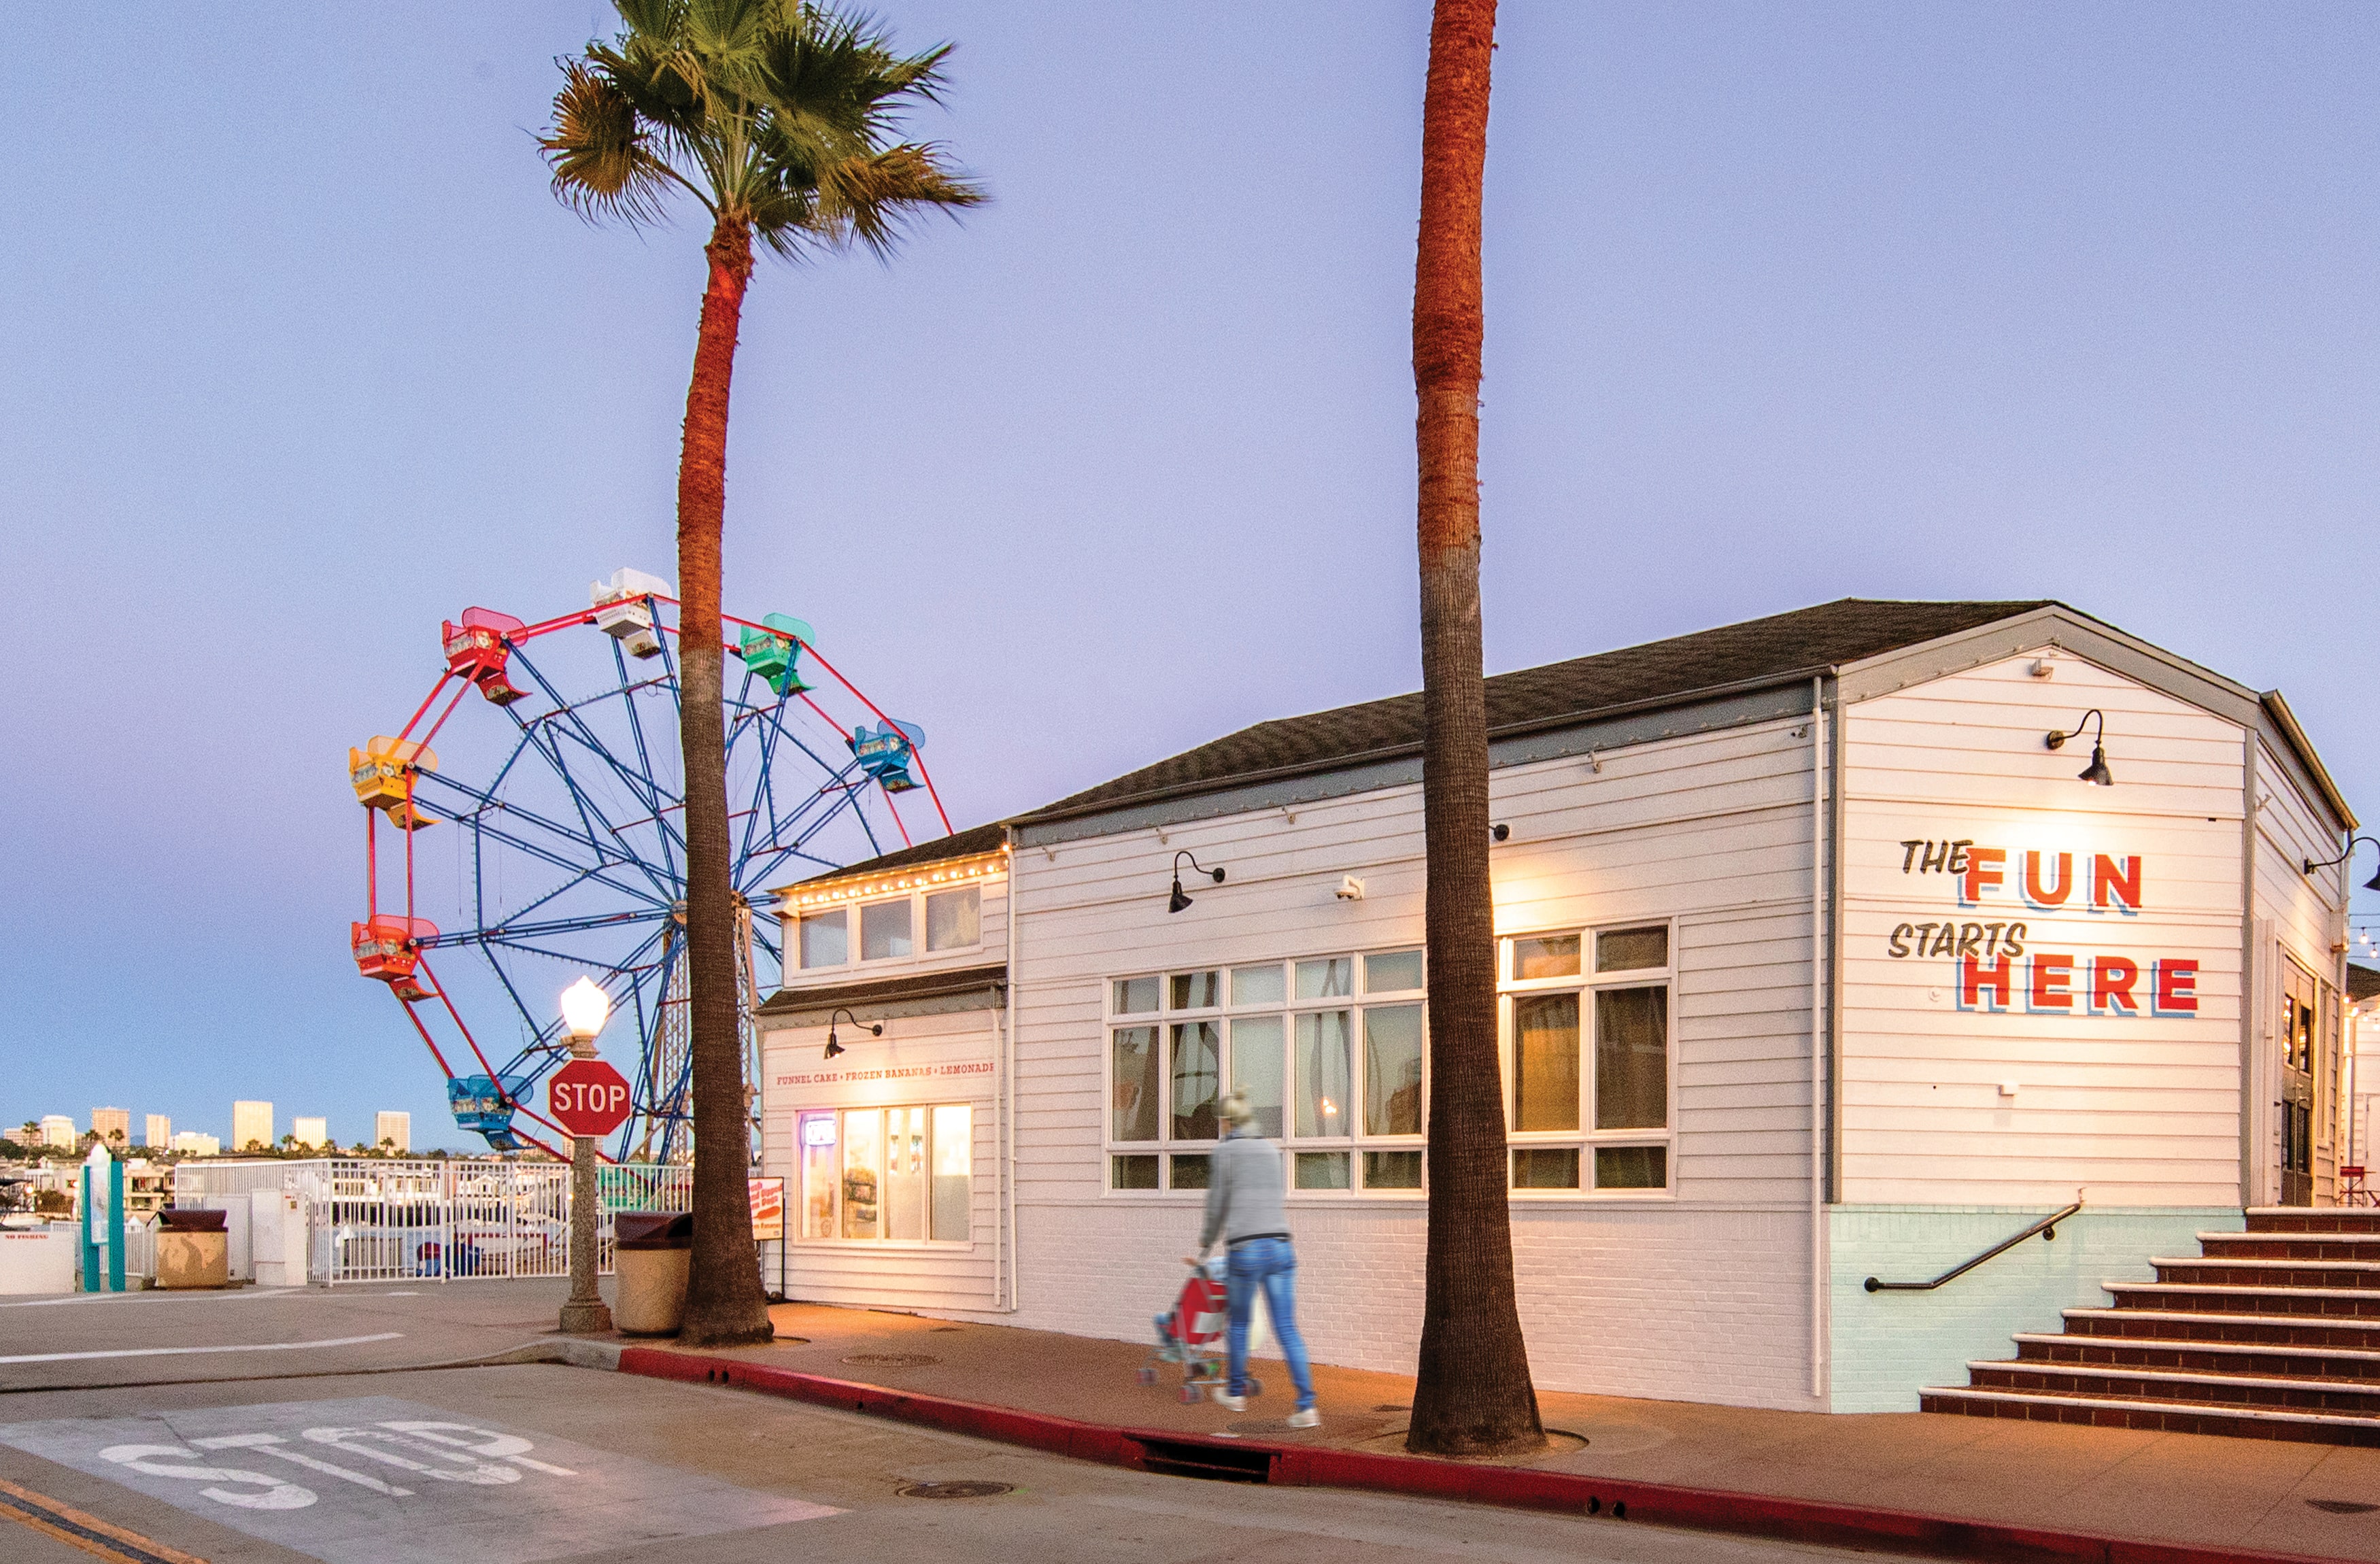 Image of woman pushing a stroller past "The Fun Starts Here" painted red lettering mural on the side of the building at the Balboa Fun Zone in Newport Beach, California nearby the ferris wheel. 